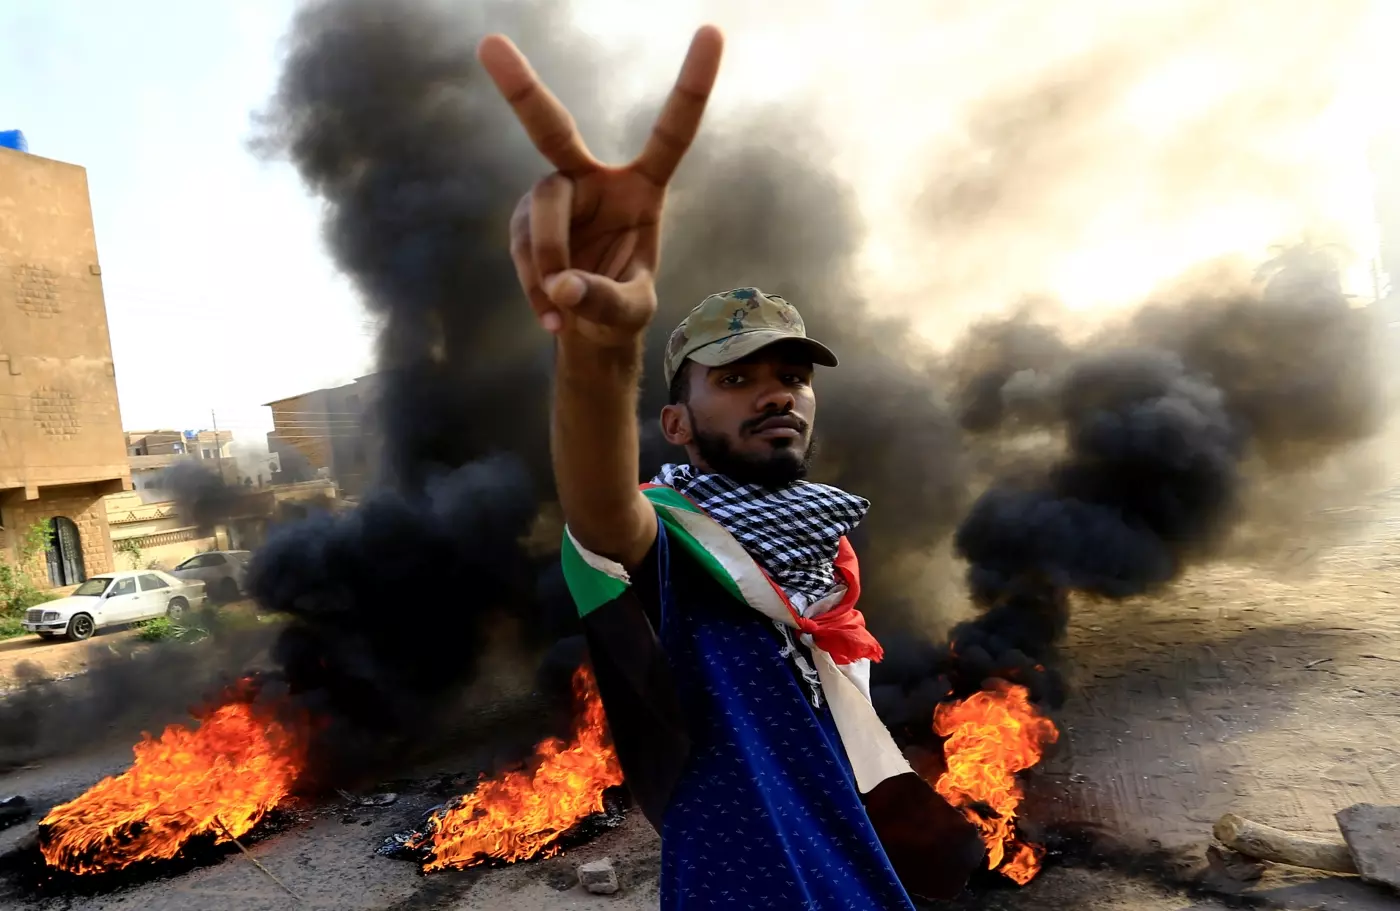 A man with the Sudan flag tied around his neck shows the camera a peace sign, while a car burns behind him.